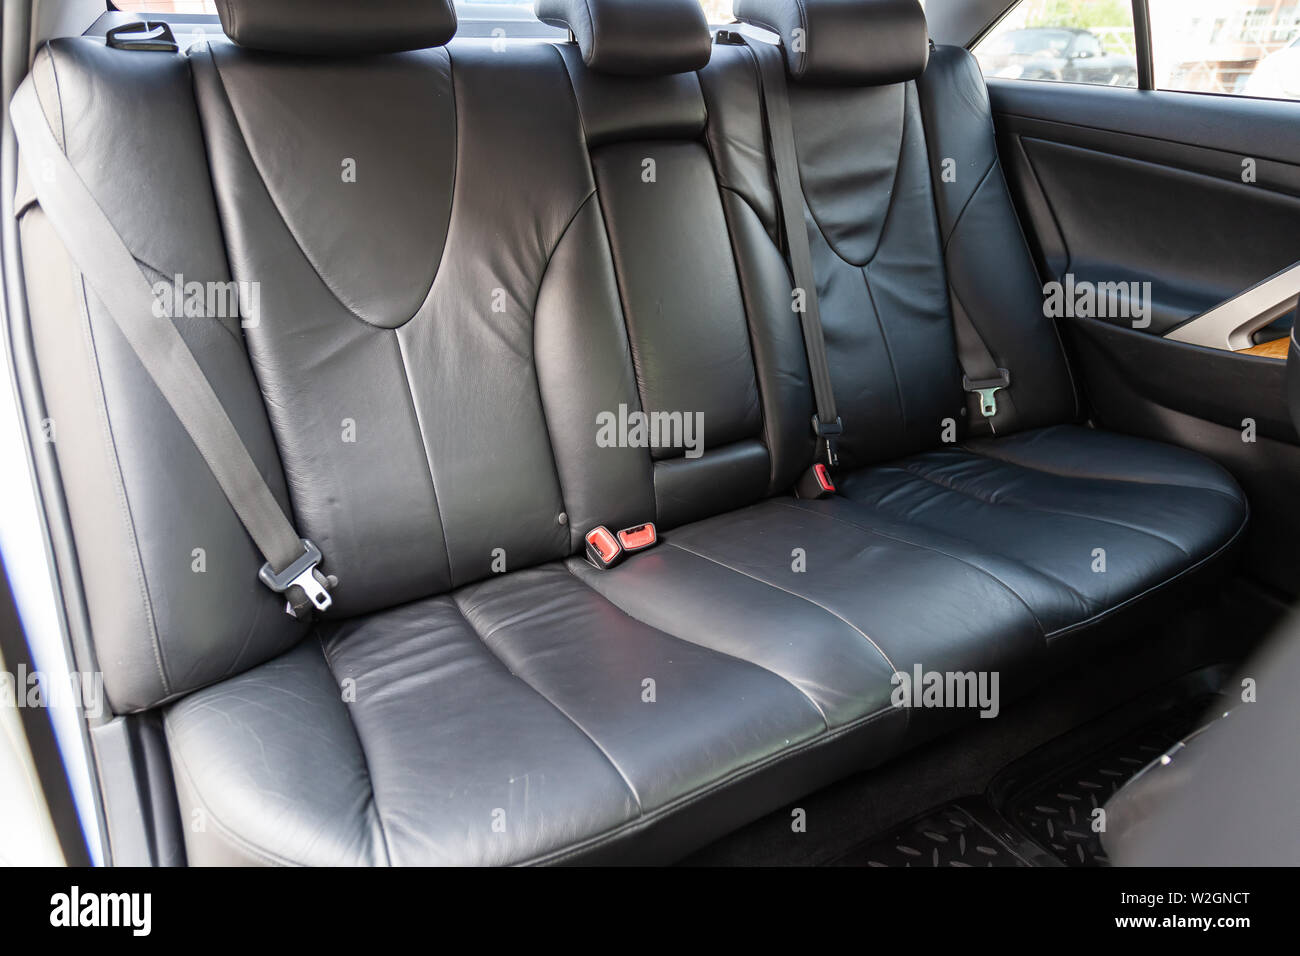 Novosibirsk, Russia - 07.09.2019: View to the interior of Toyota Camry 2006 with dashboard, rear seats, black leather after cleaning before sale on pa Stock Photo